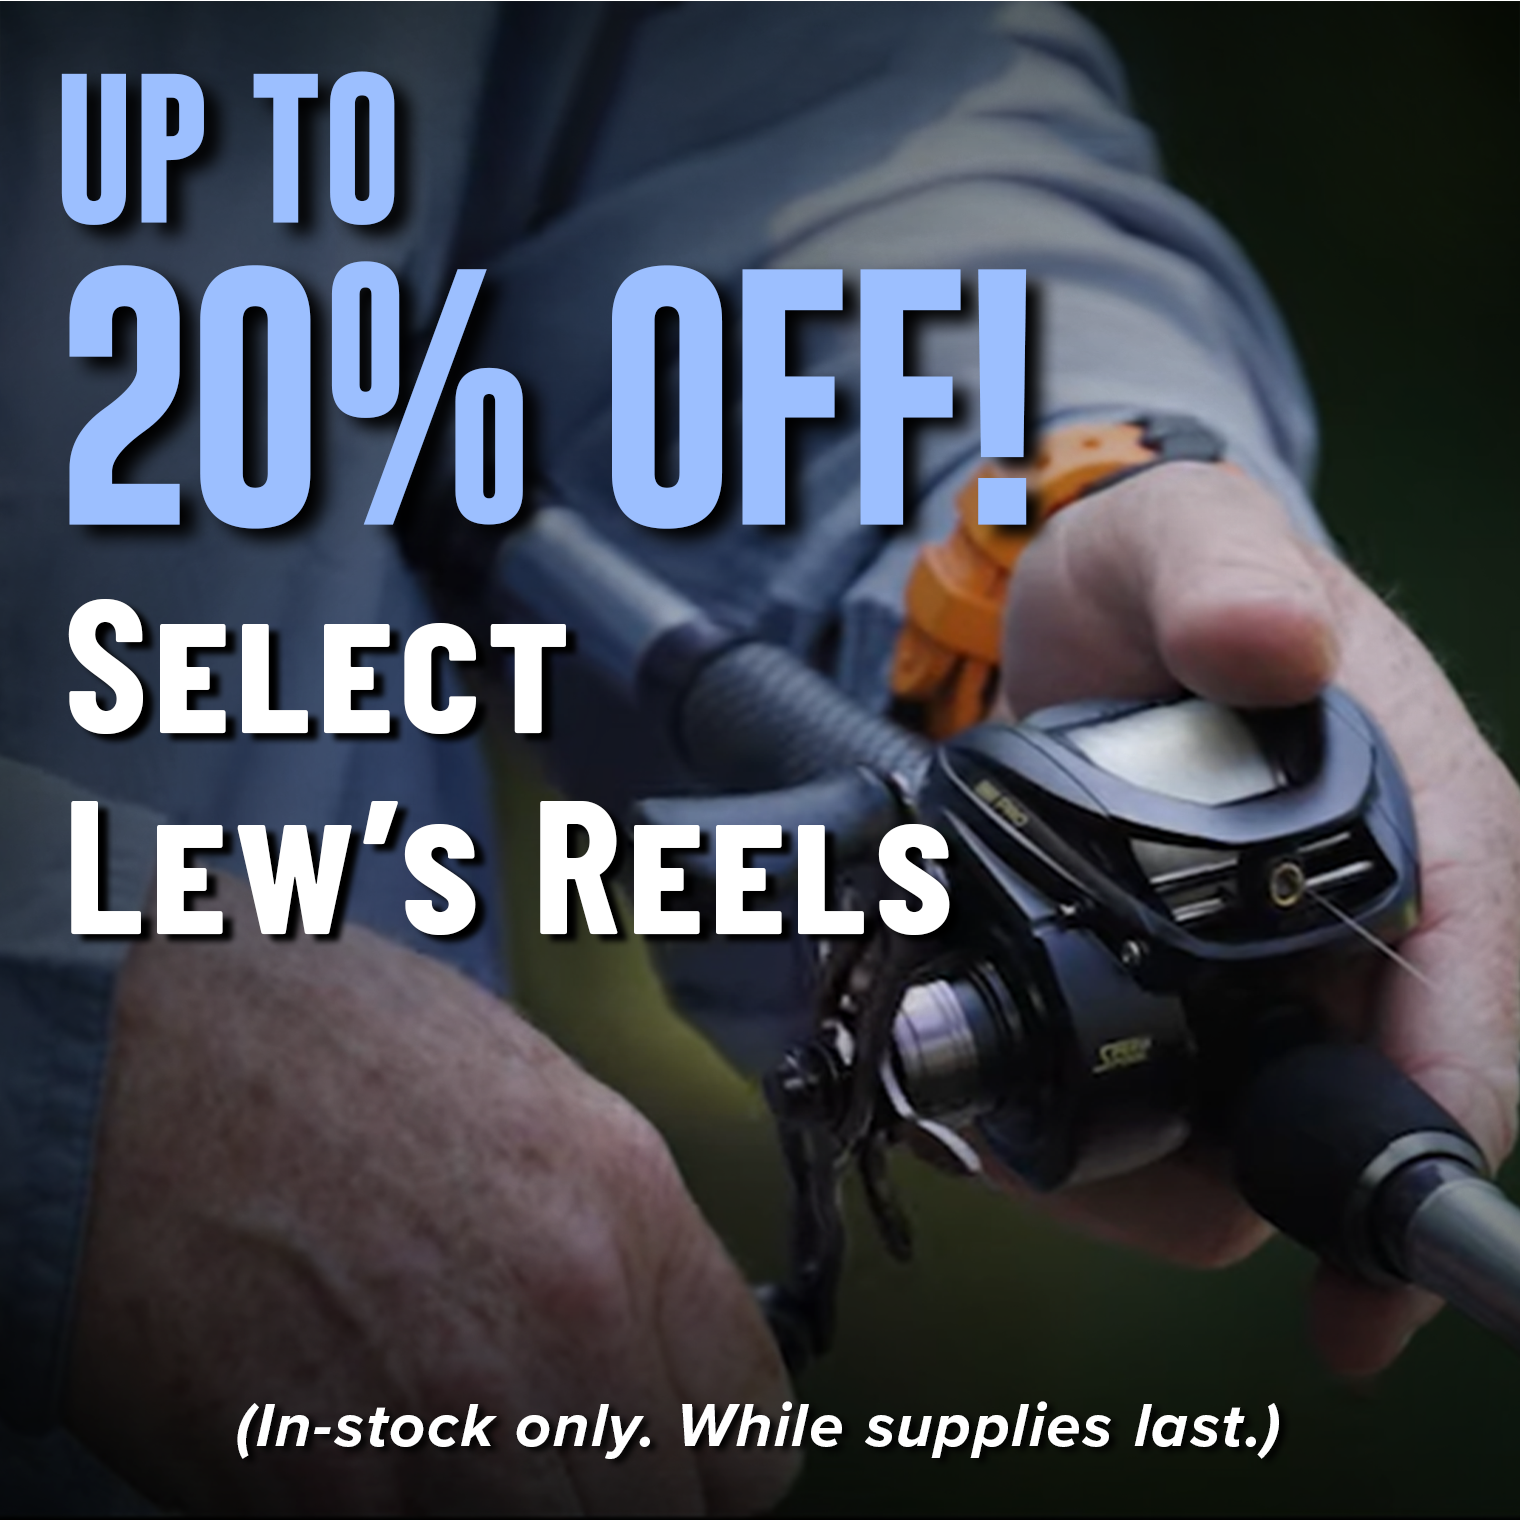 Up to 20% Off! Select Lew's Reels